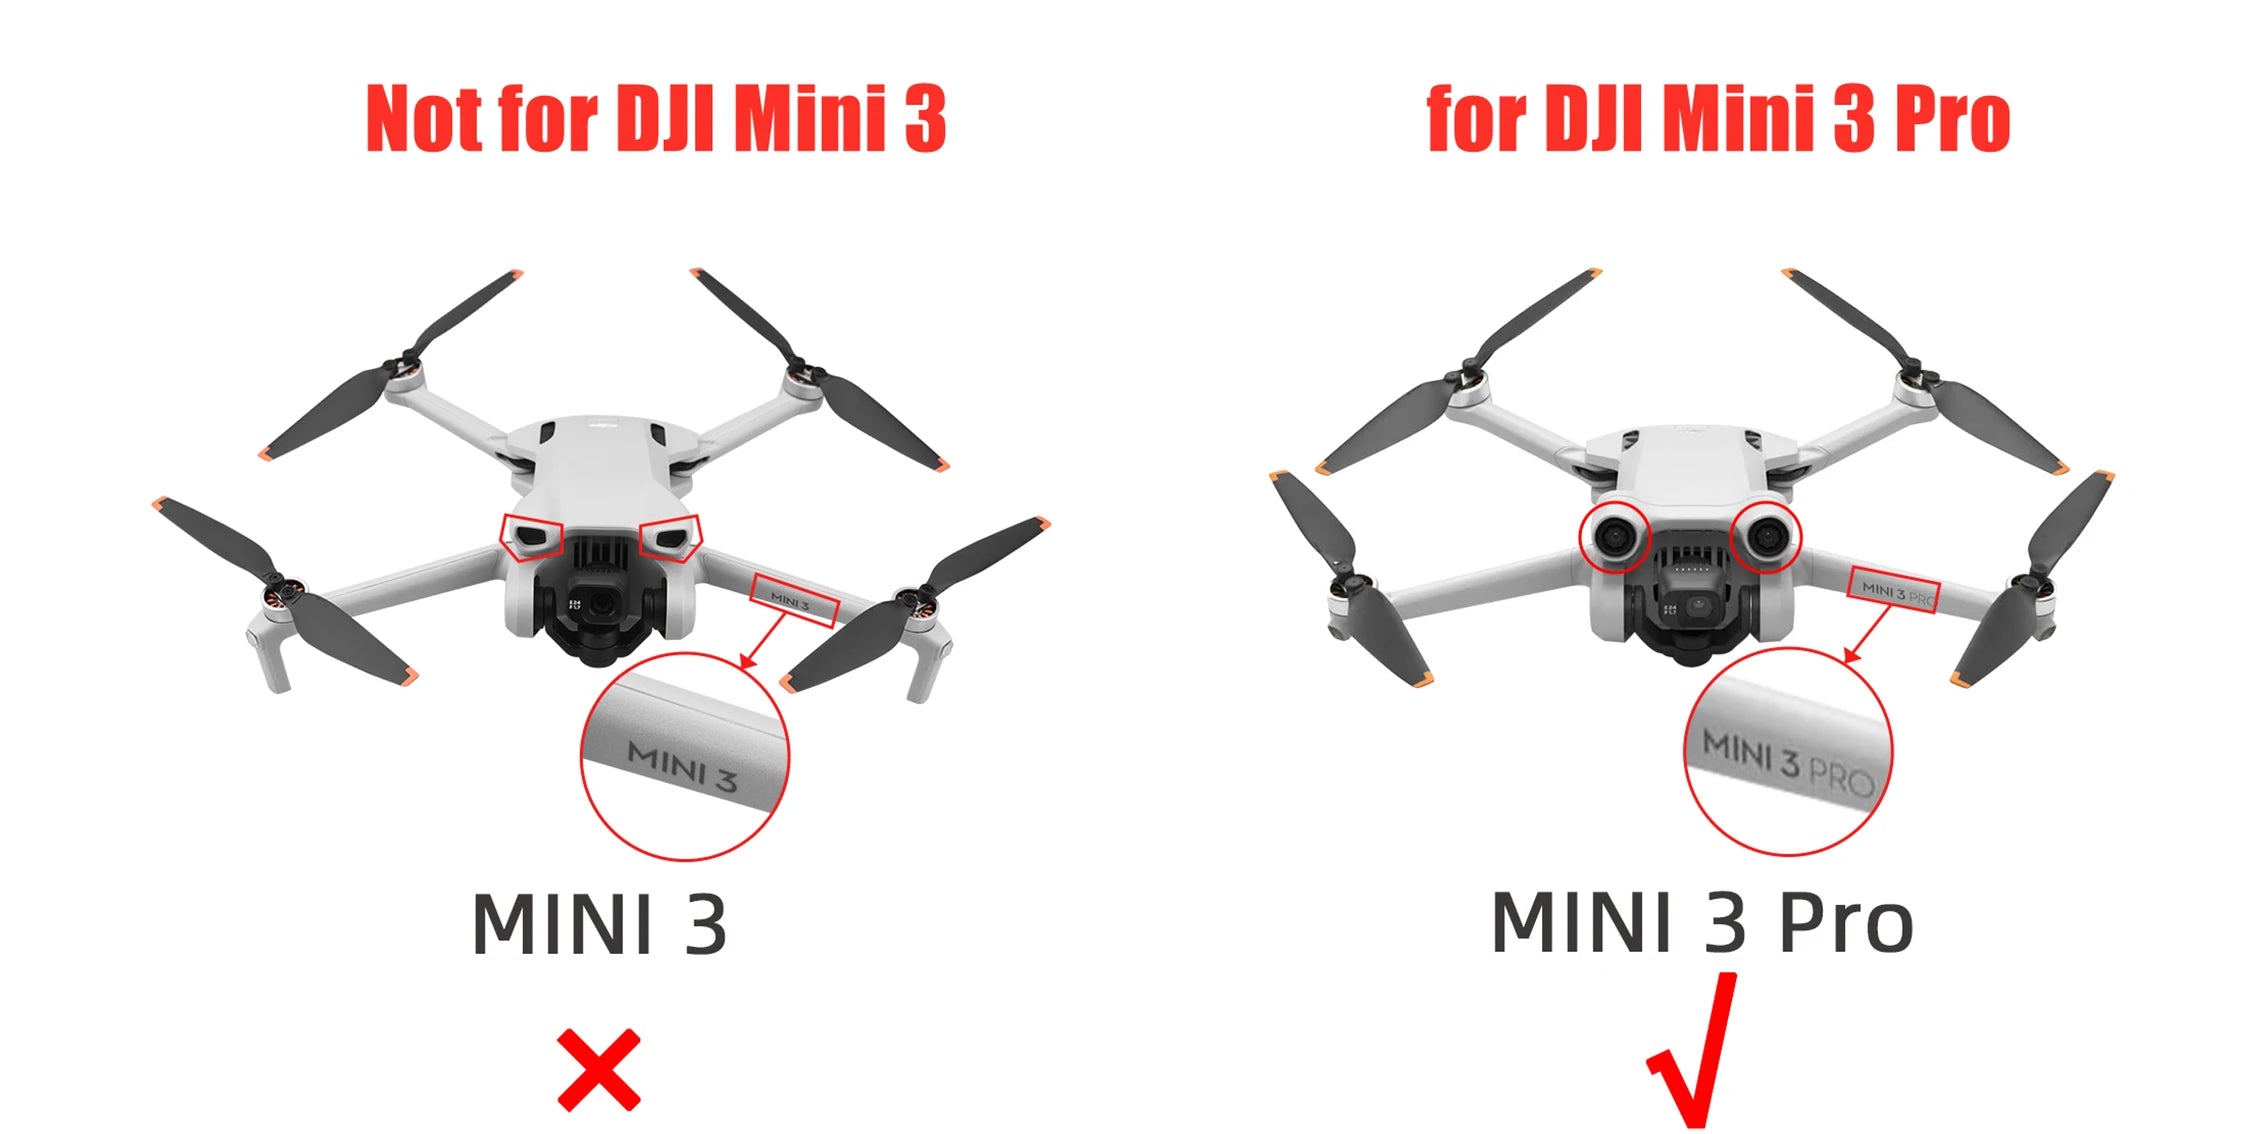 Wide-Angle lens Filter for DJI Mini 3 Pro, enlarged field of view, clear imaging, and upgraded texture . wide-angle large field